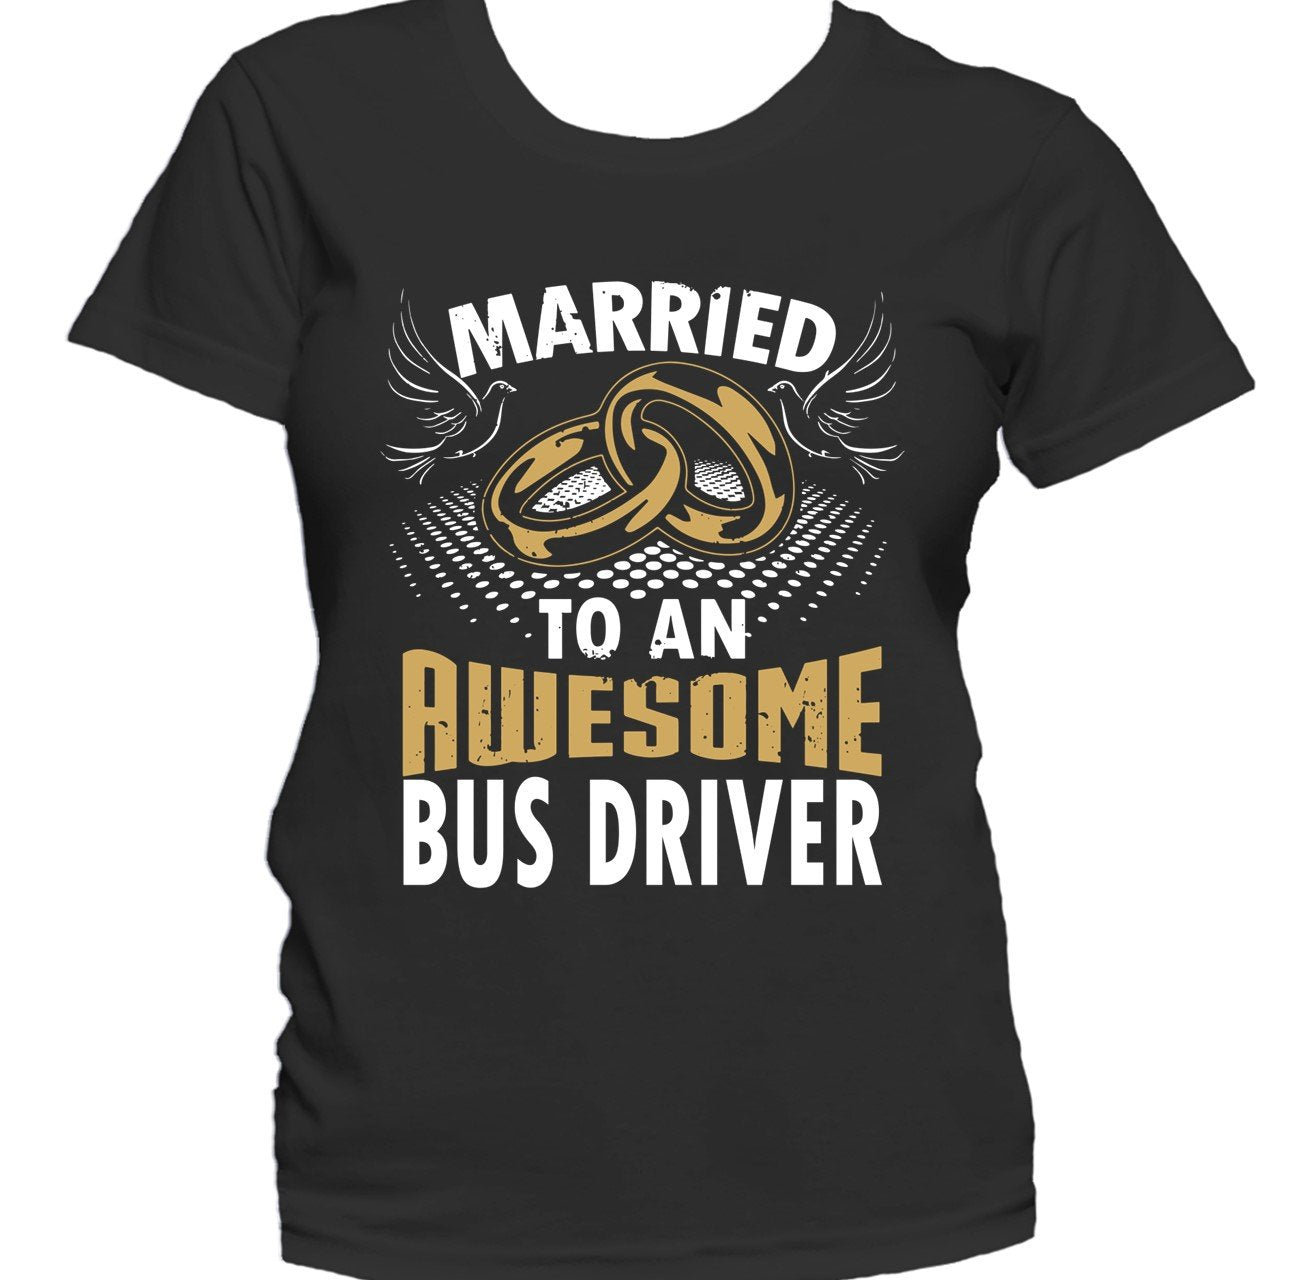 Married To An Awesome Bus Driver Women's T-Shirt